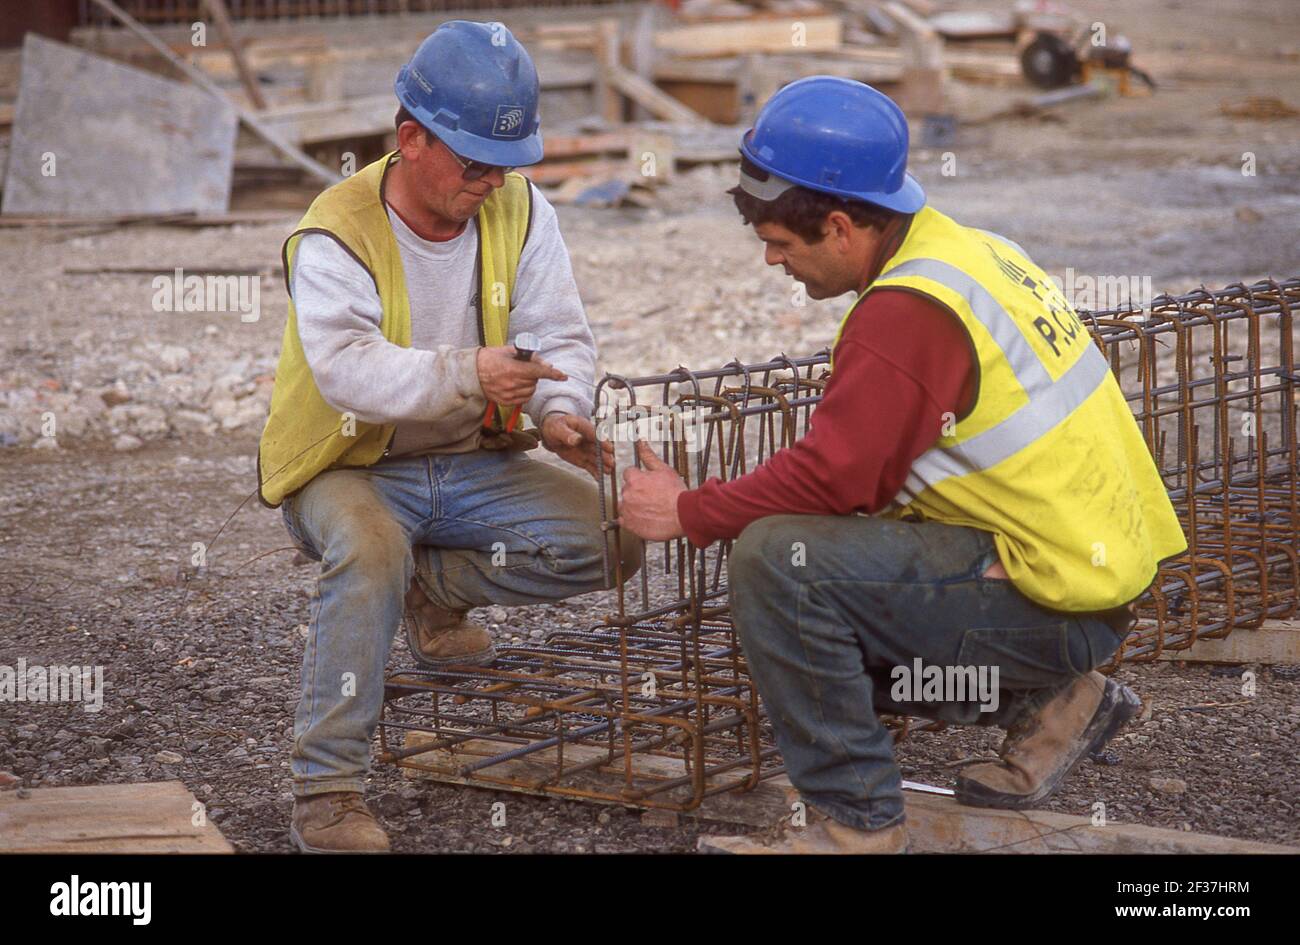 Construction workers preparing concrete steel reinforcement mesh, City of Westminster, Greater London, England, United Kingdom Stock Photo